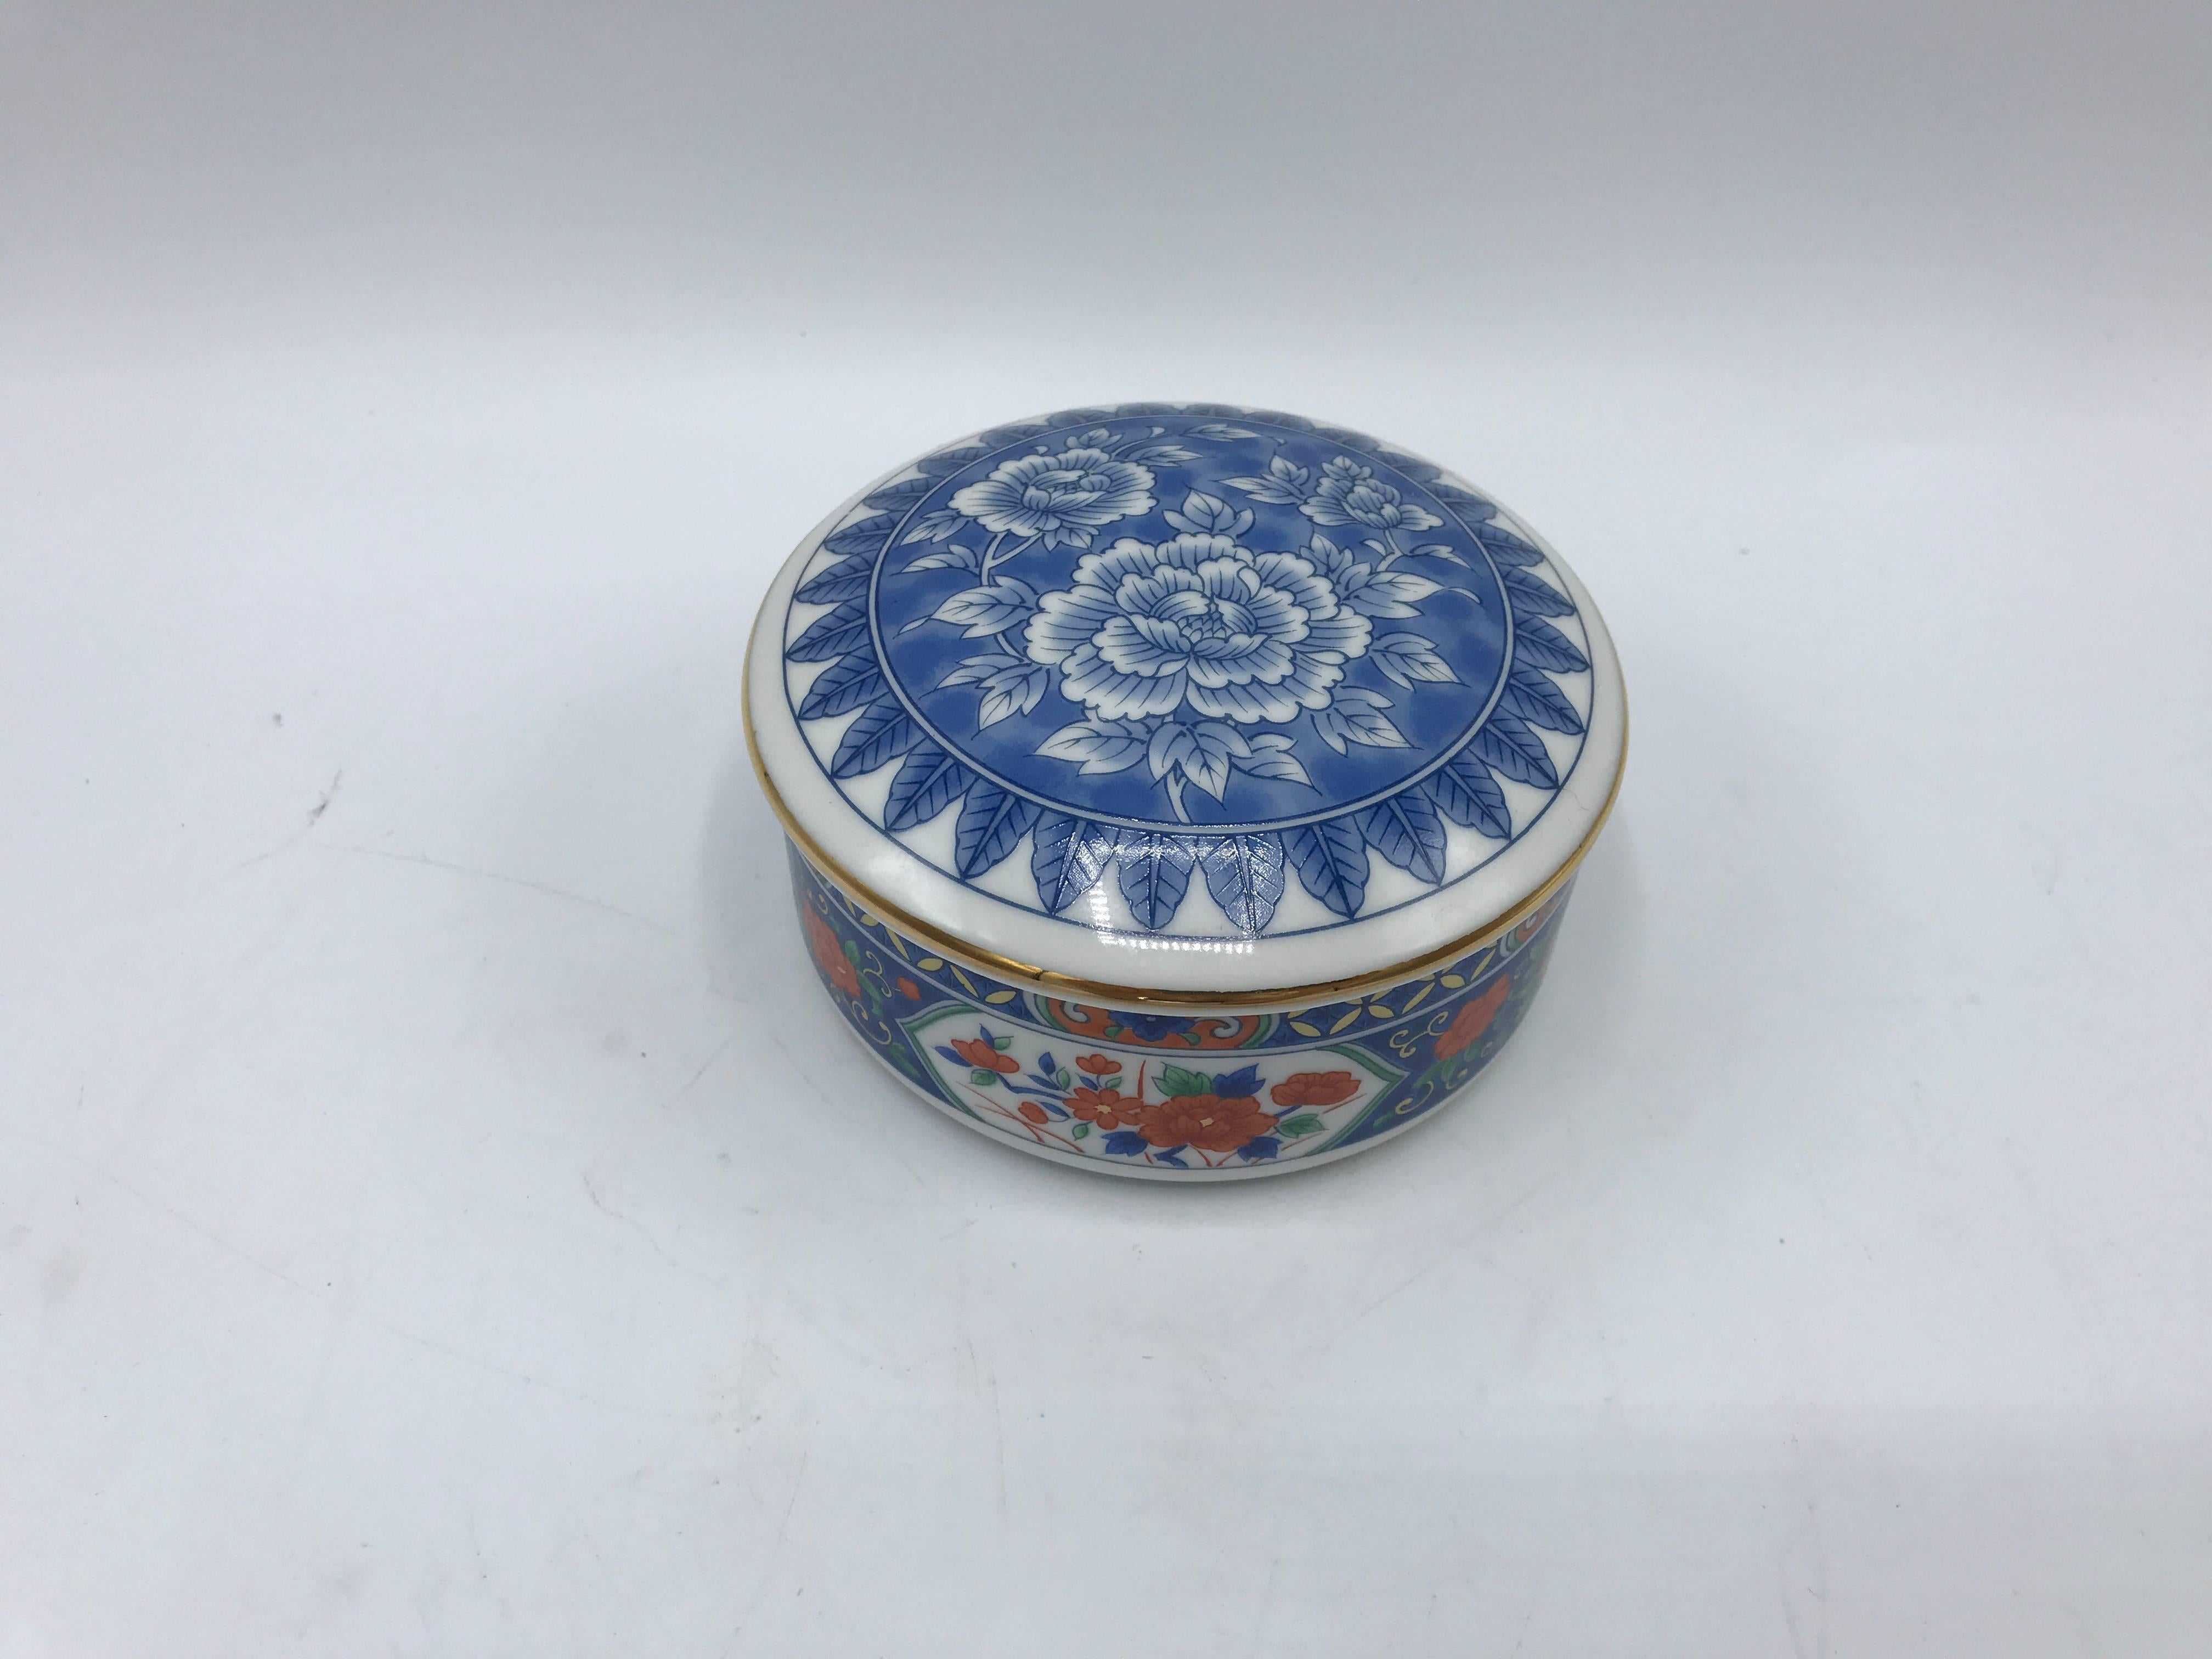 Offered is a gorgeous, 1980s Tiffany & Co. blue and white chinoiserie lidded bowl with a hand-painted floral motif and gold border.